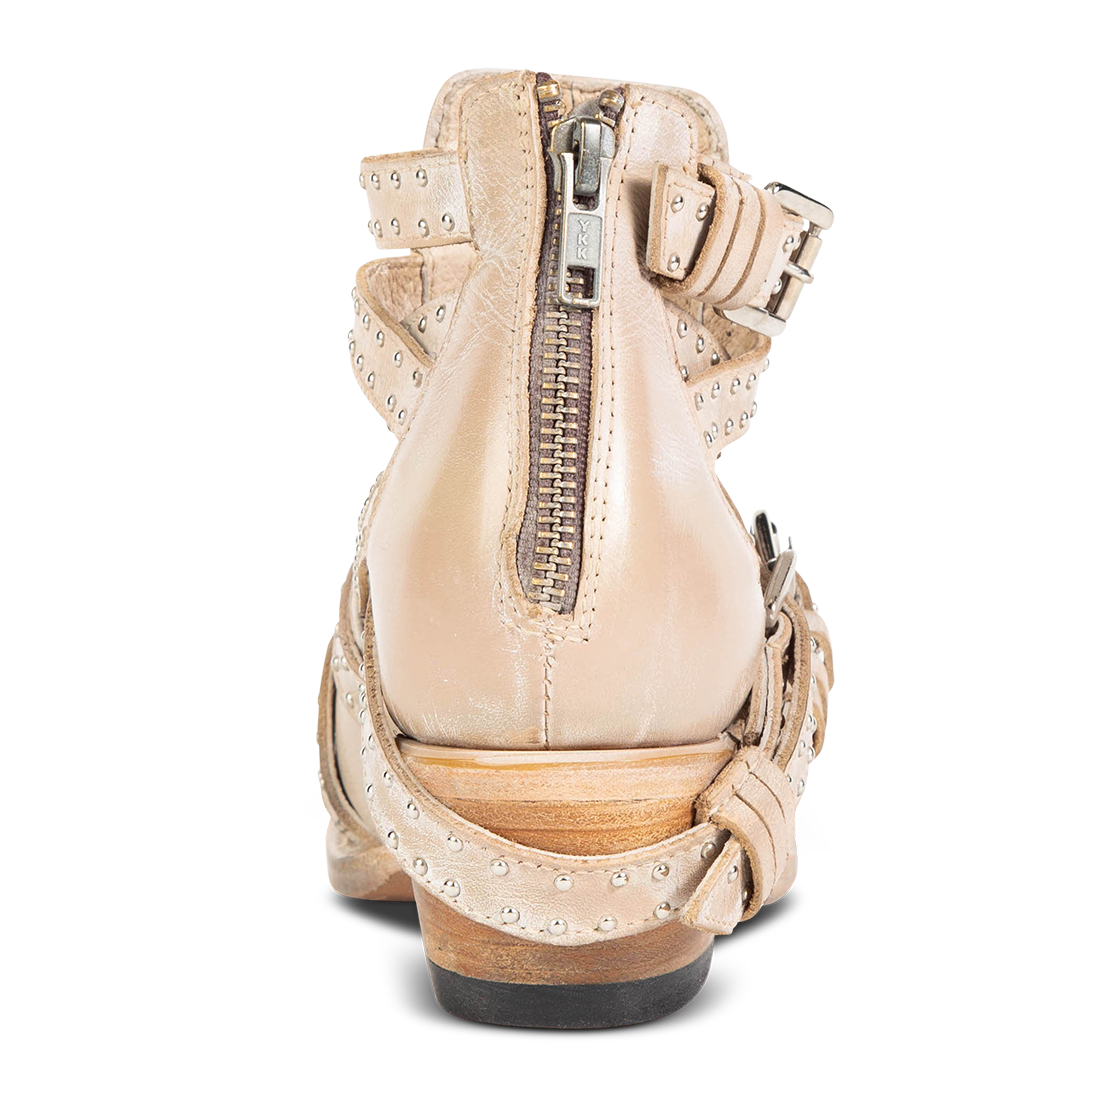 Back view showing zipper closure and mid heel on FREEBIRD women's Wasp beige ankle bootie